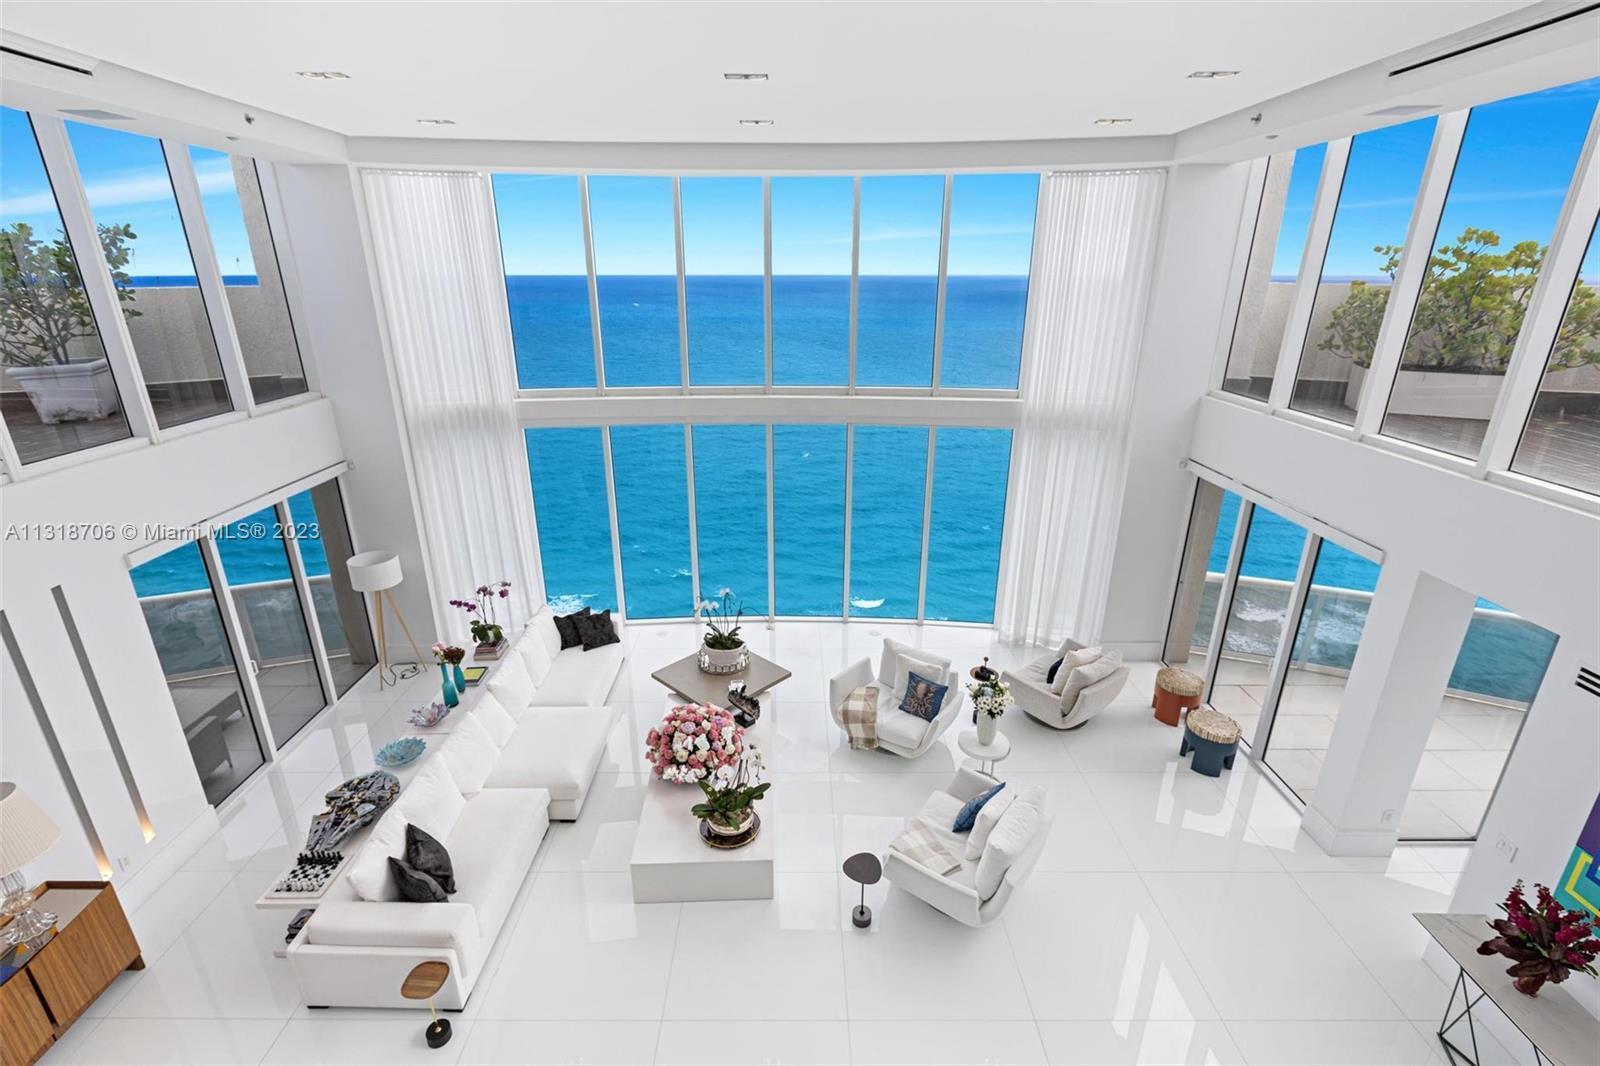 ONE OF A KIND, MANSION IN THE SKIES IN SUNNY ISLES WITH 180o OCEAN VIEWS. 
THIS IS A UNIQUE SKI-VIL